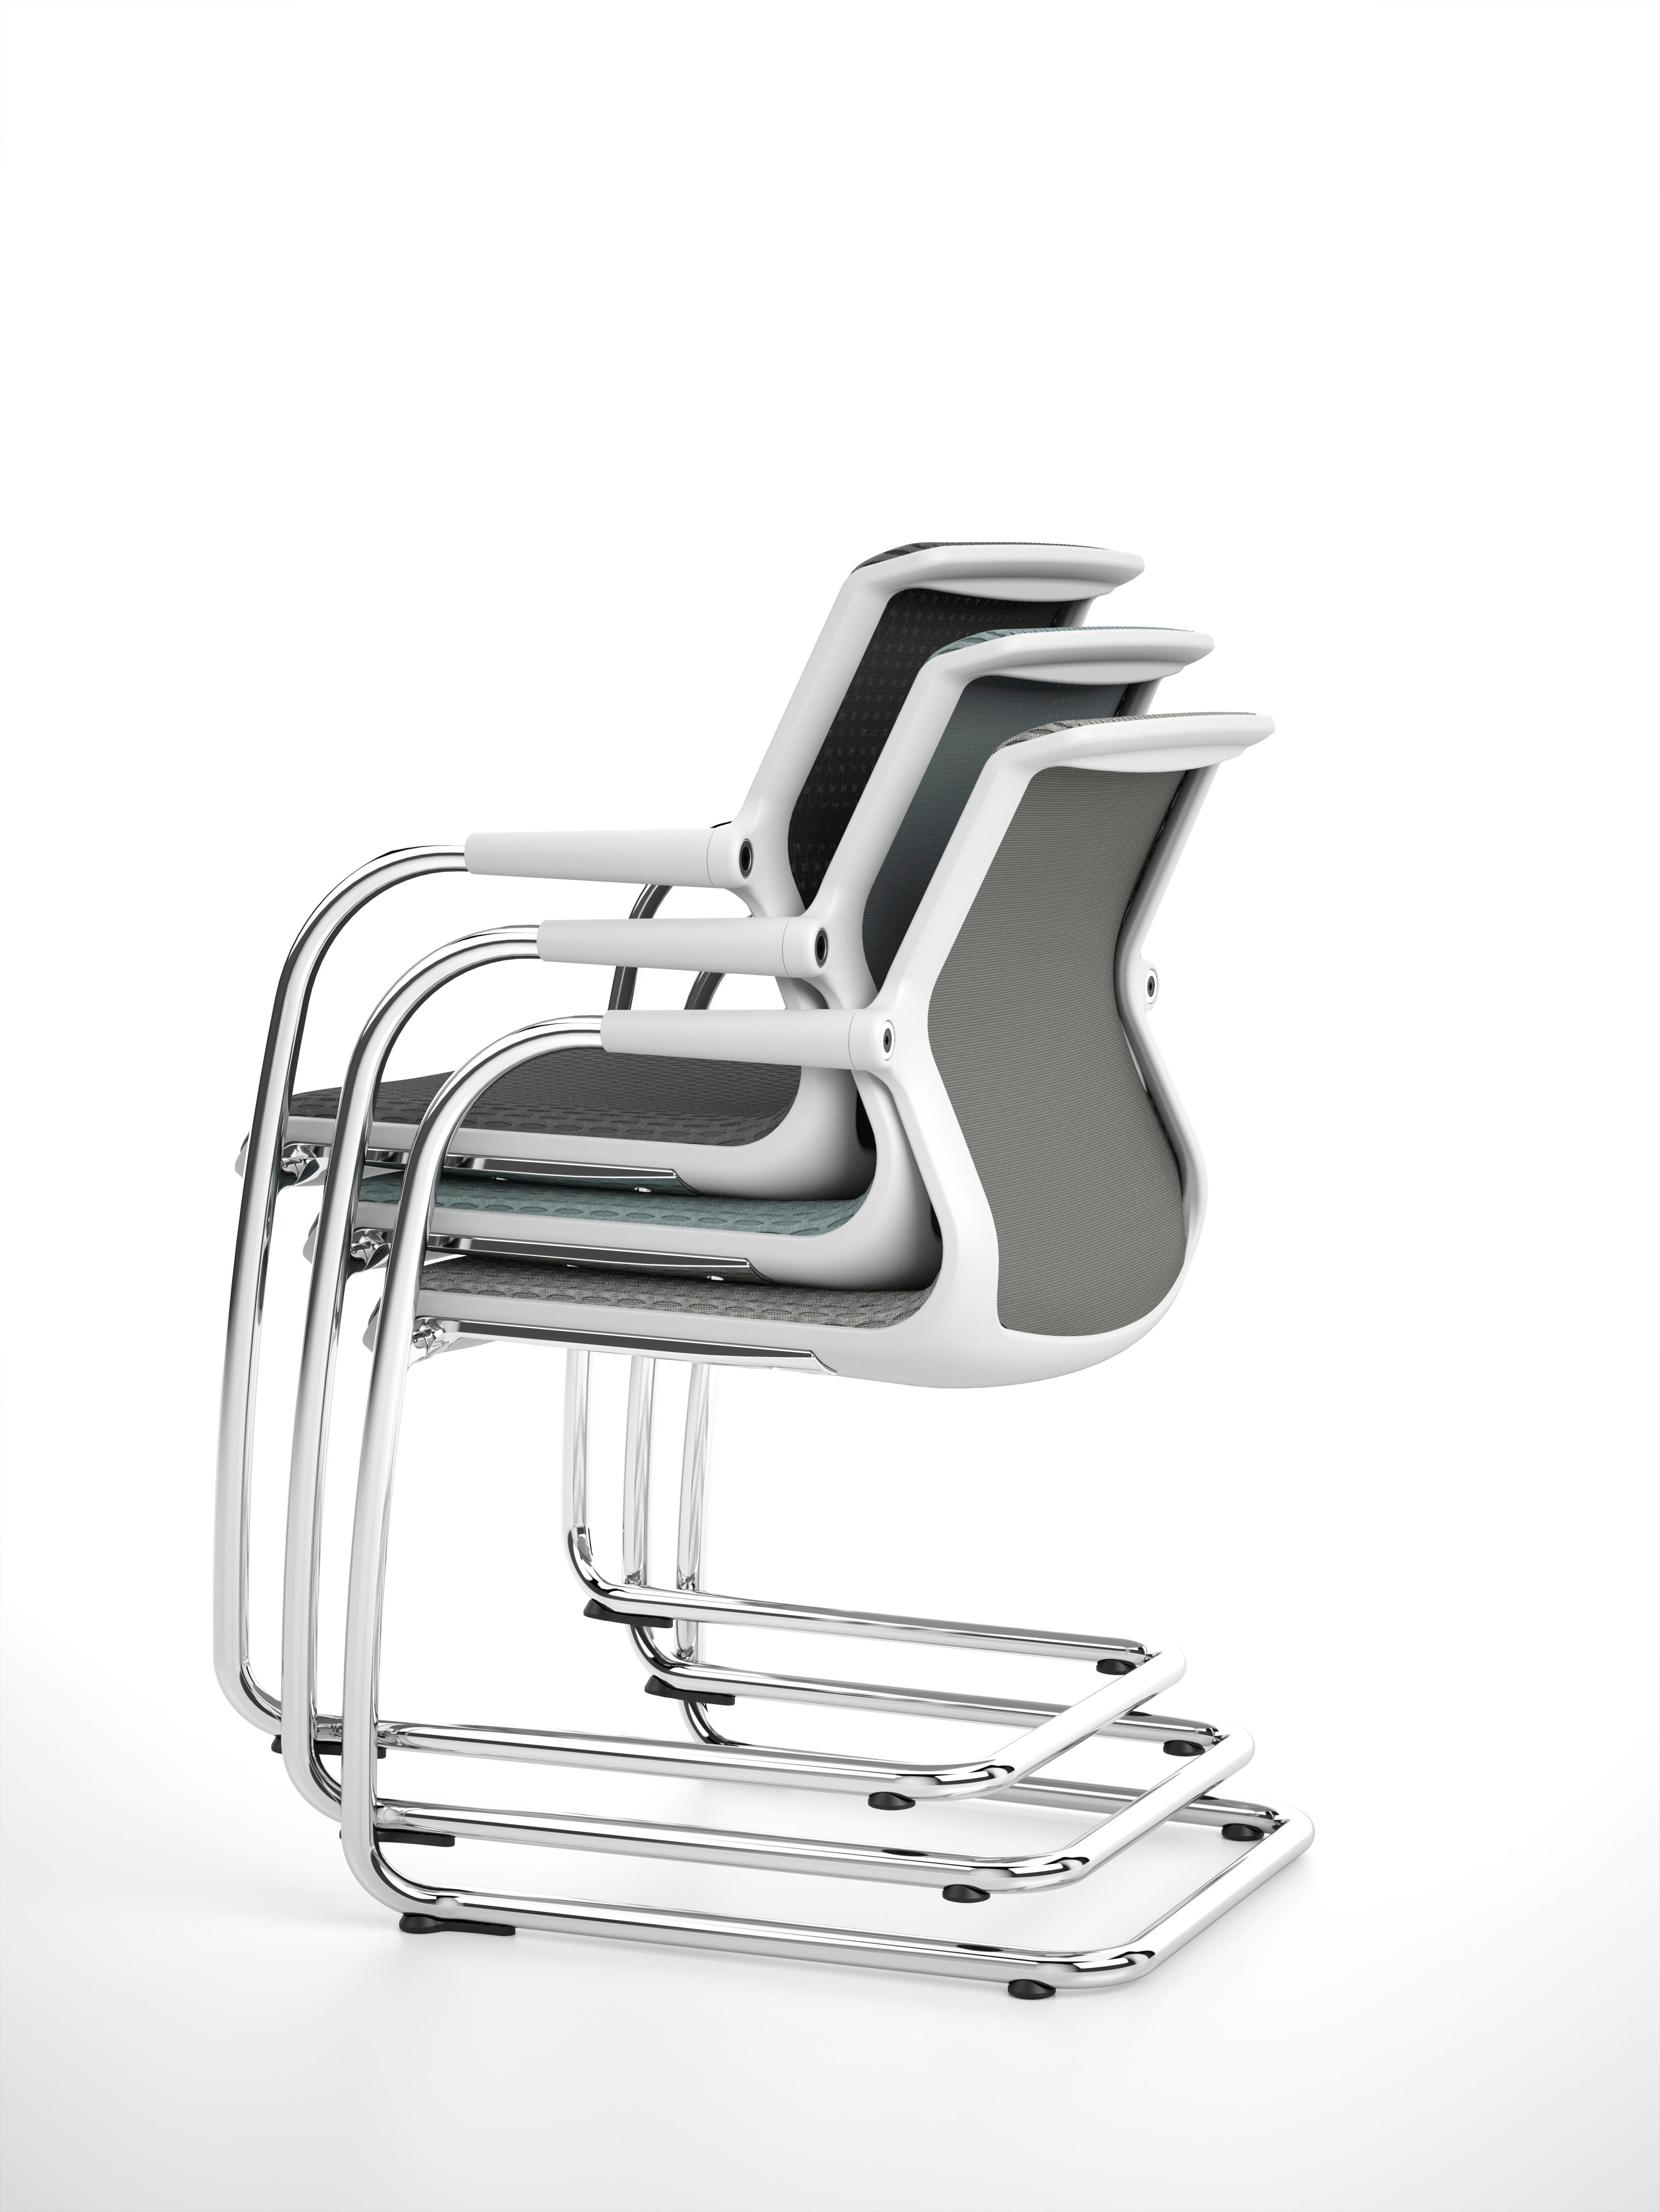 These items are currently only available in the United States.

The practical, robust Unix chair by Antonio Citterio is the ultimate all-rounder. The cantilever chair flexes comfortably under the user and is ideal for visitor and conference